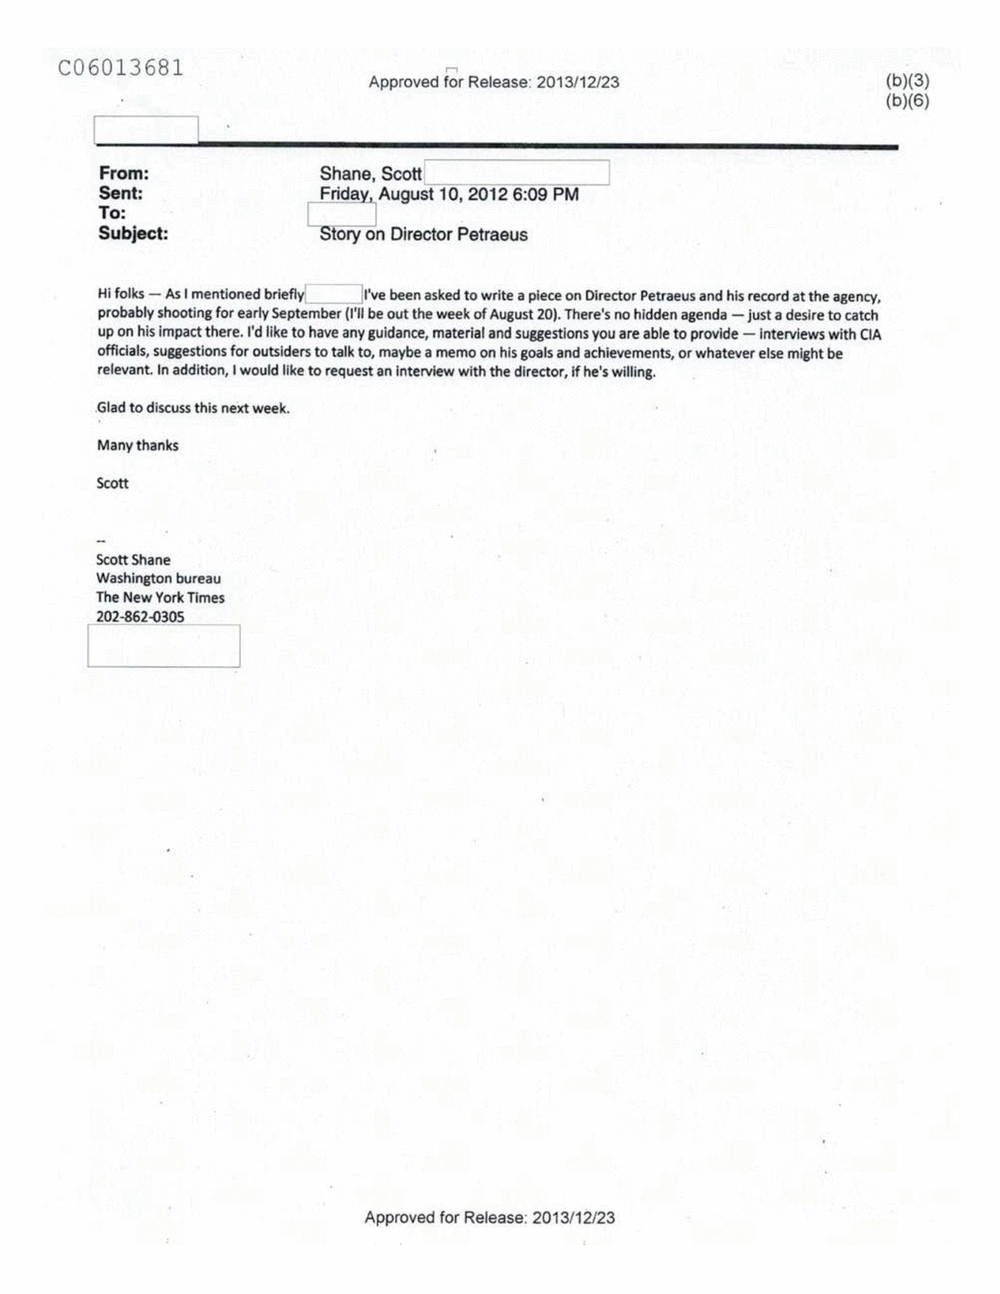 Page 538 from Email Correspondence Between Reporters and CIA Flacks